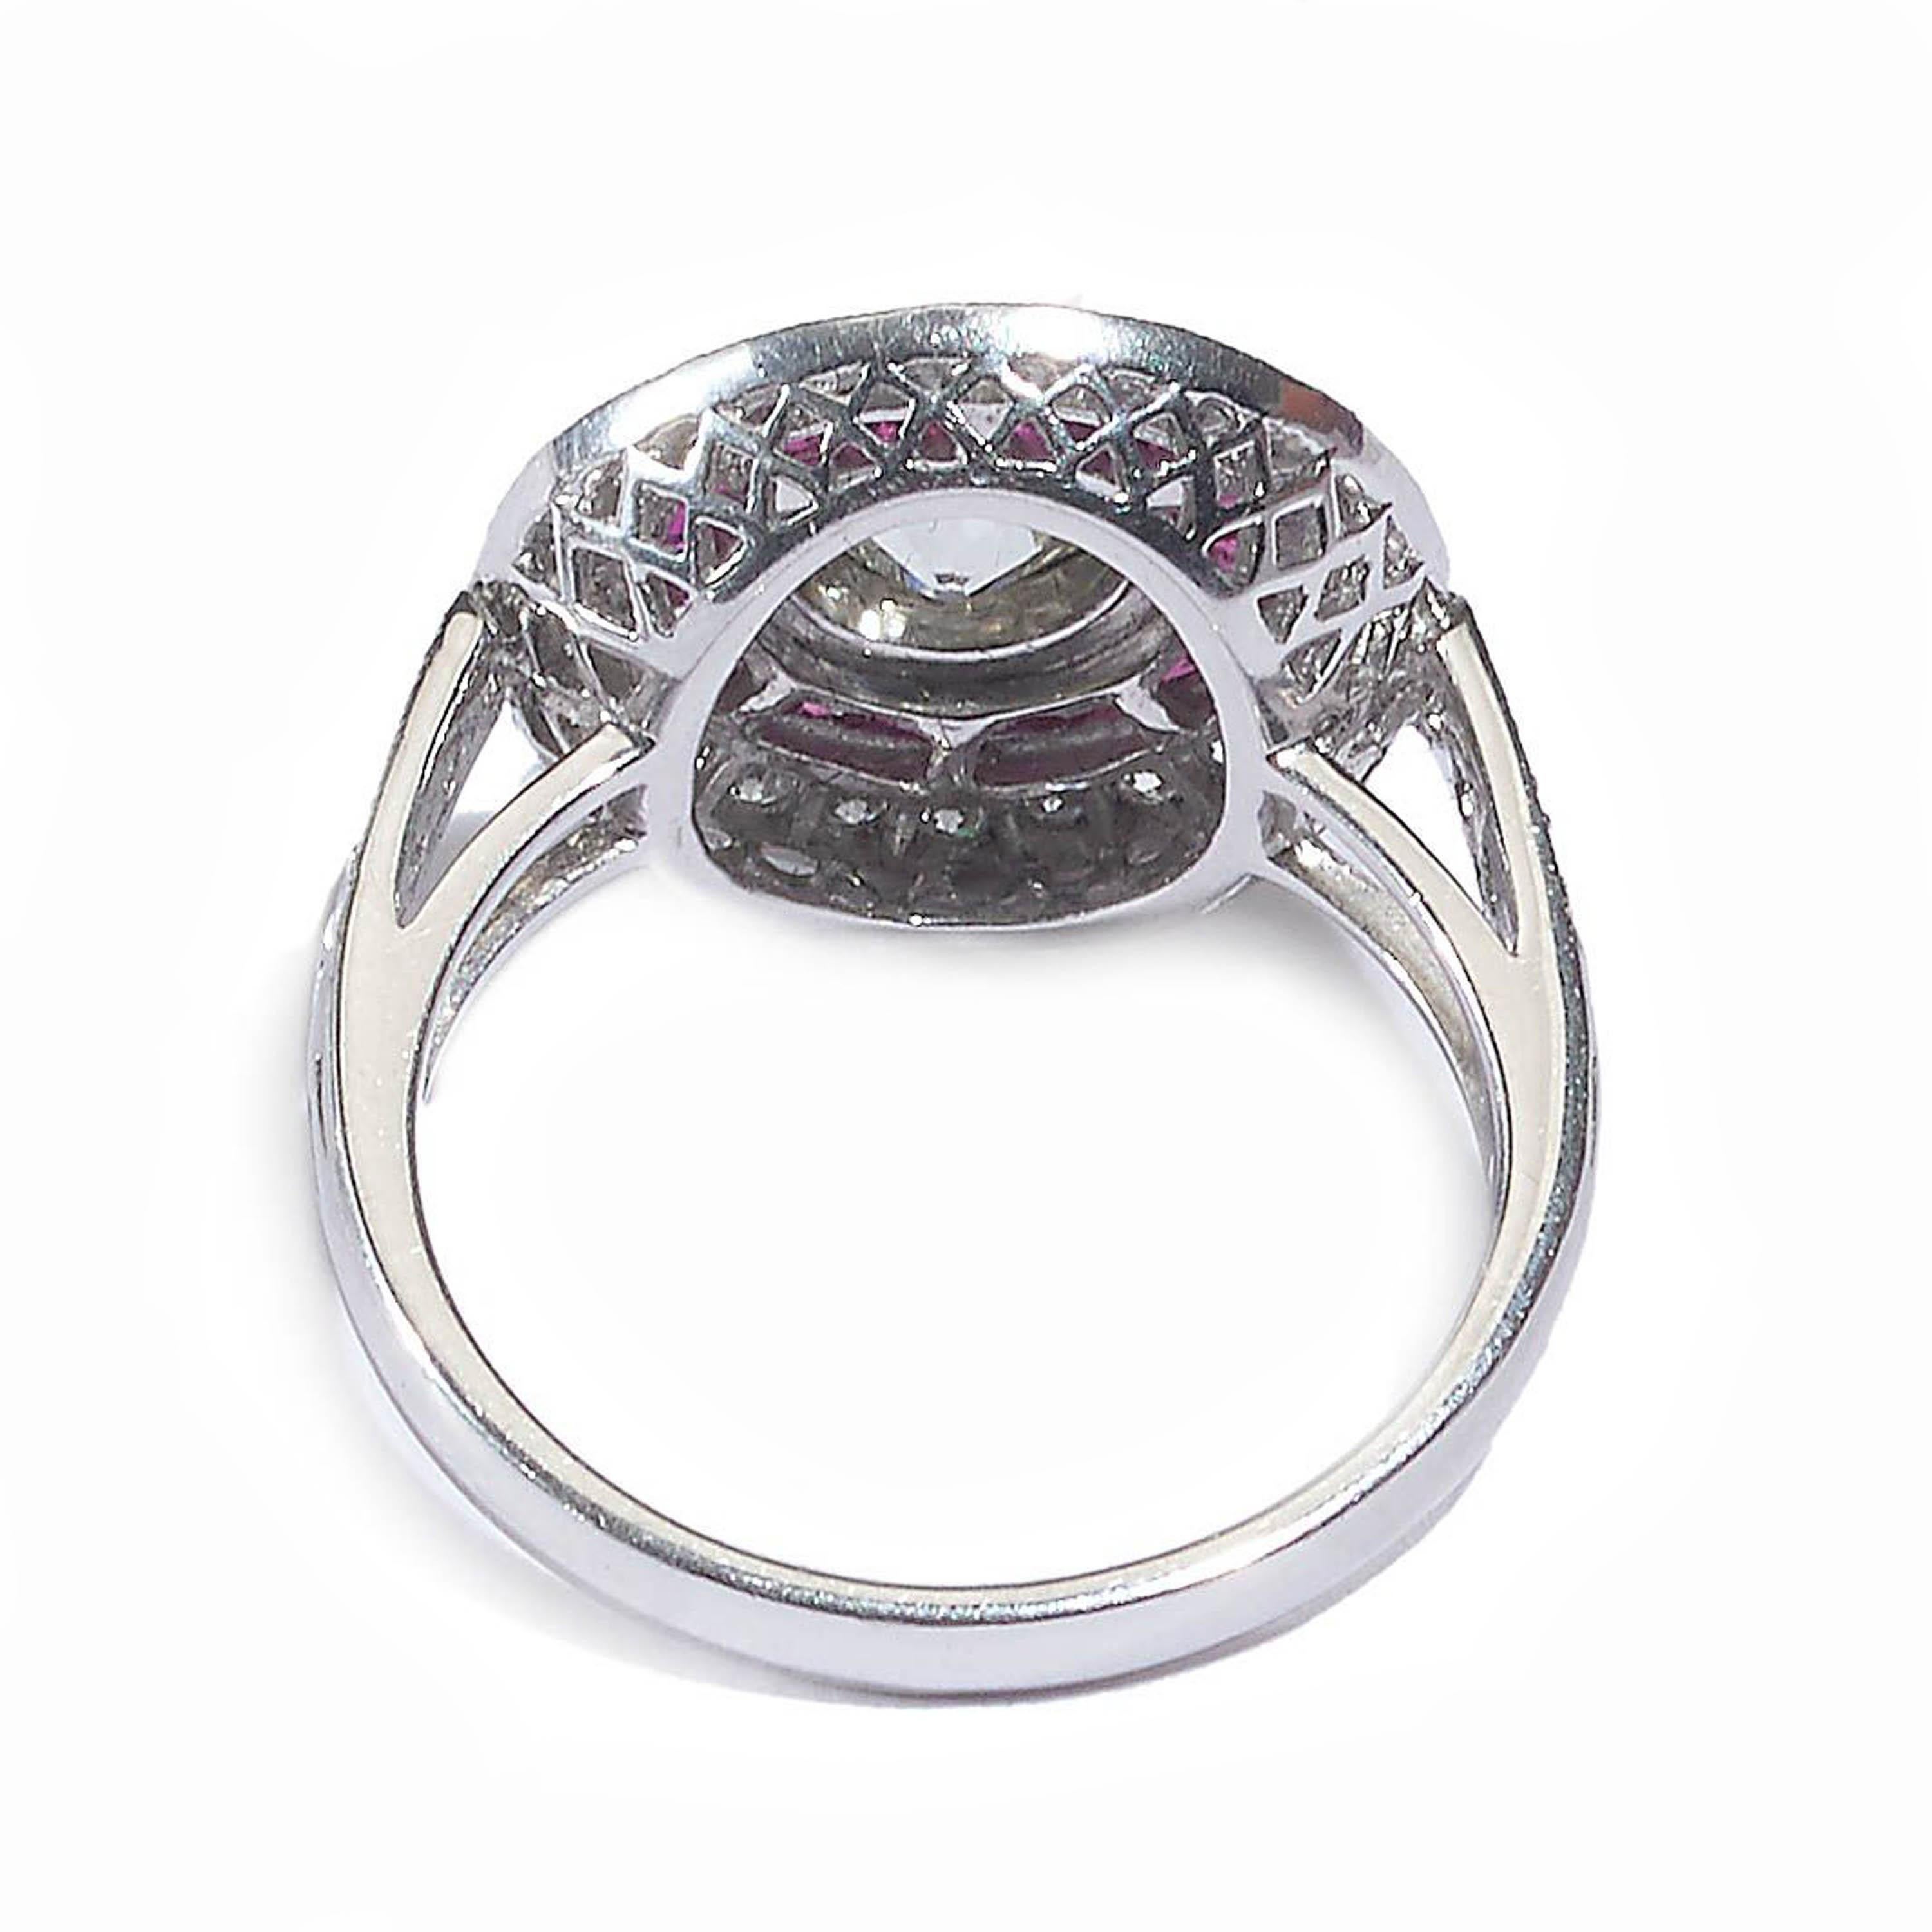 Old European Cut Modern Art Deco Style Ruby, Diamond and Platinum Target Cluster Ring 0.93 Carats